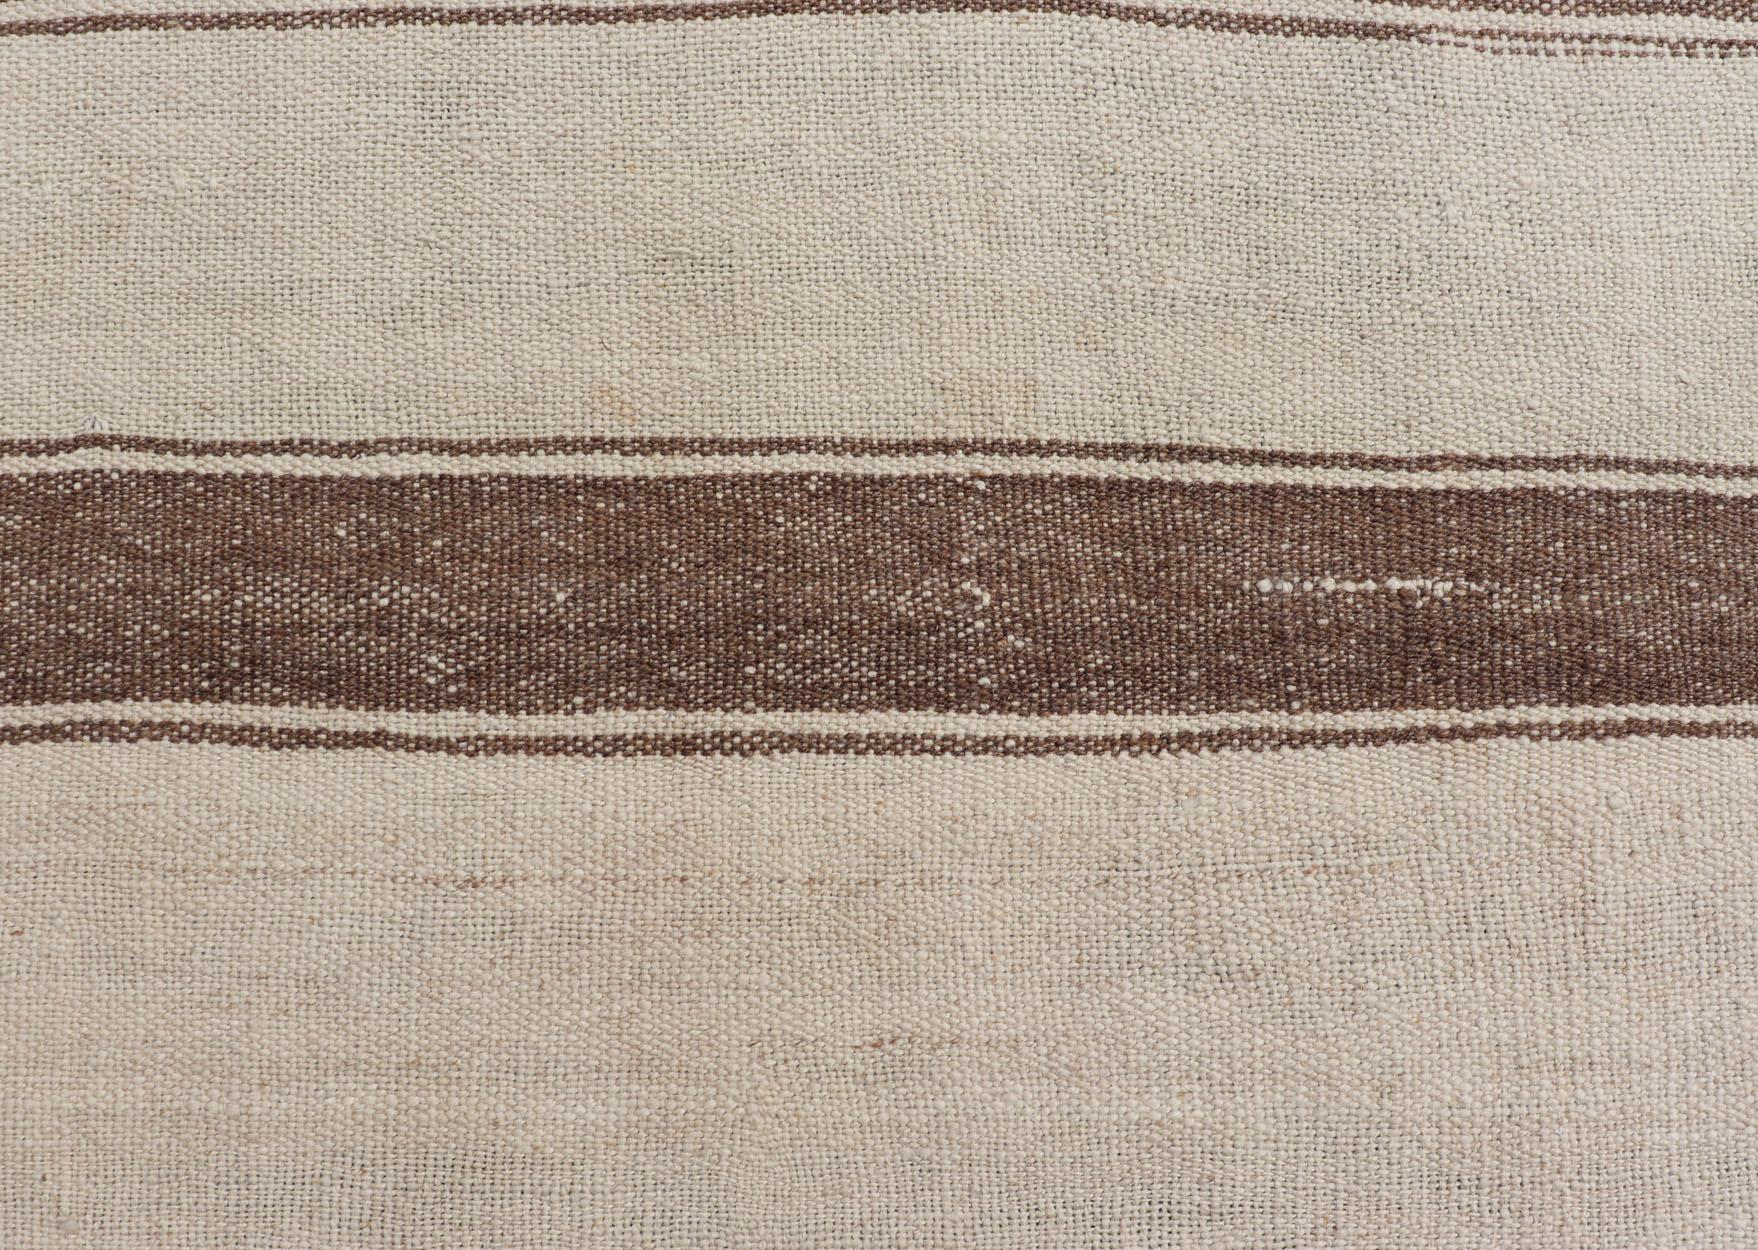 Vintage Turkish Kilim with Stripes in Tan, Gray, Taupe, Cream & Brown For Sale 3